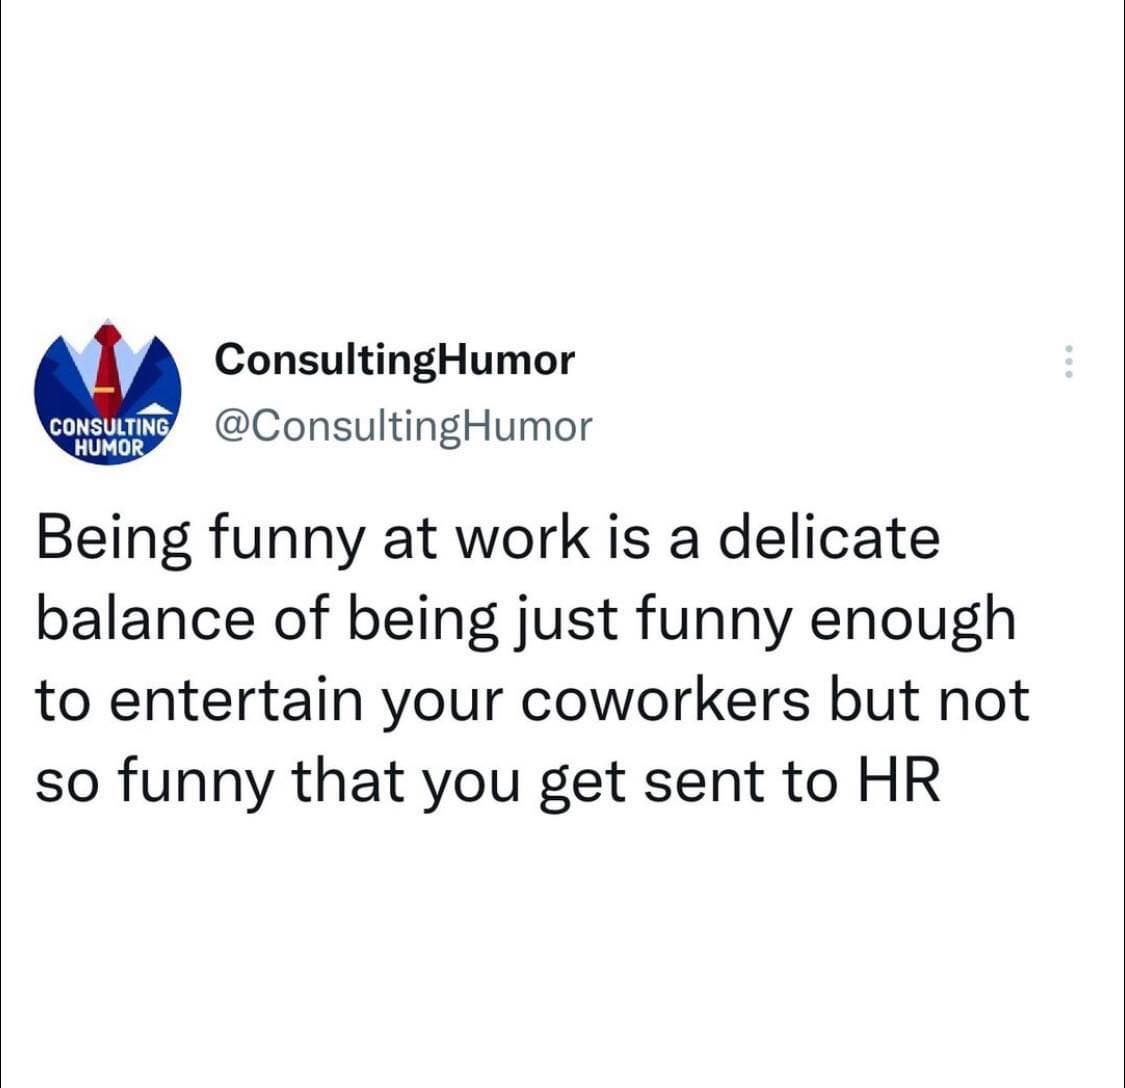 organization - ConsultingHumor Consulting Humor Being funny at work is a delicate balance of being just funny enough to entertain your coworkers but not so funny that you get sent to Hr